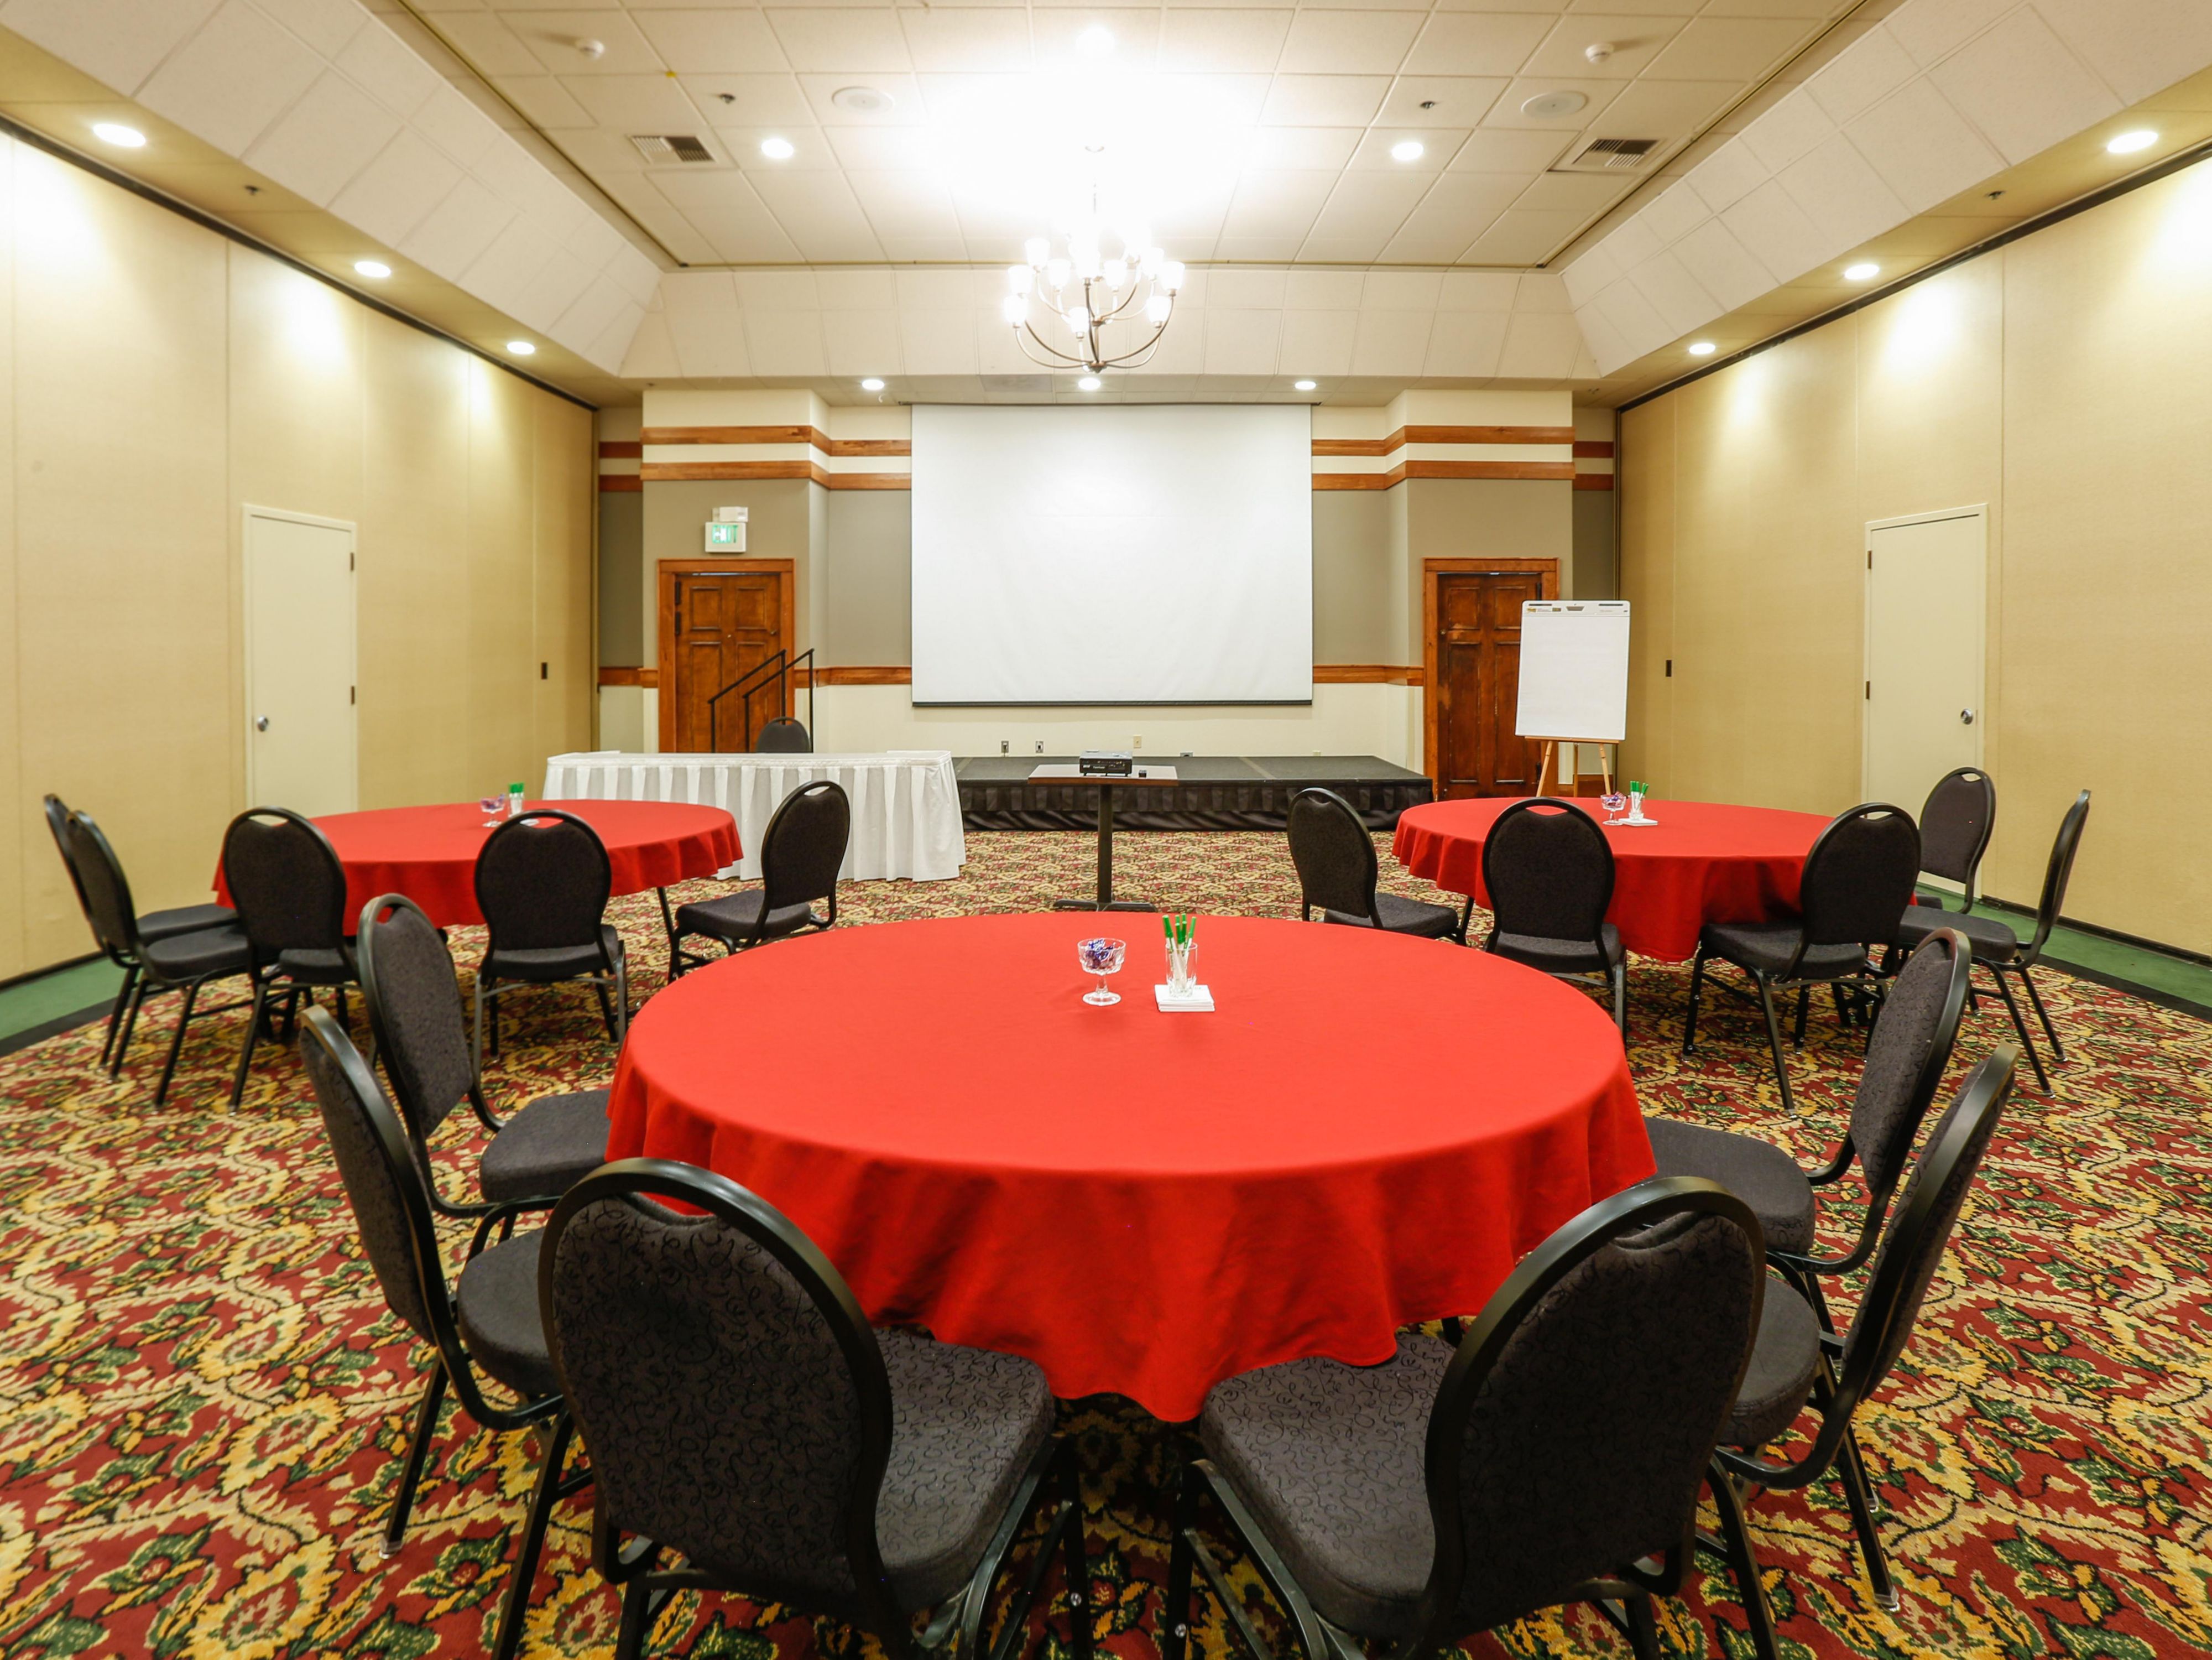 The Holiday Inn® West Yellowstone has spaces designed for intimate corporate meetings, large conferences and weddings. But the truth is, we specialize in inspired, memorable events. So whether you're a bride-to-be or a corporate retreat coordinator, set your experience somewhere boundless.